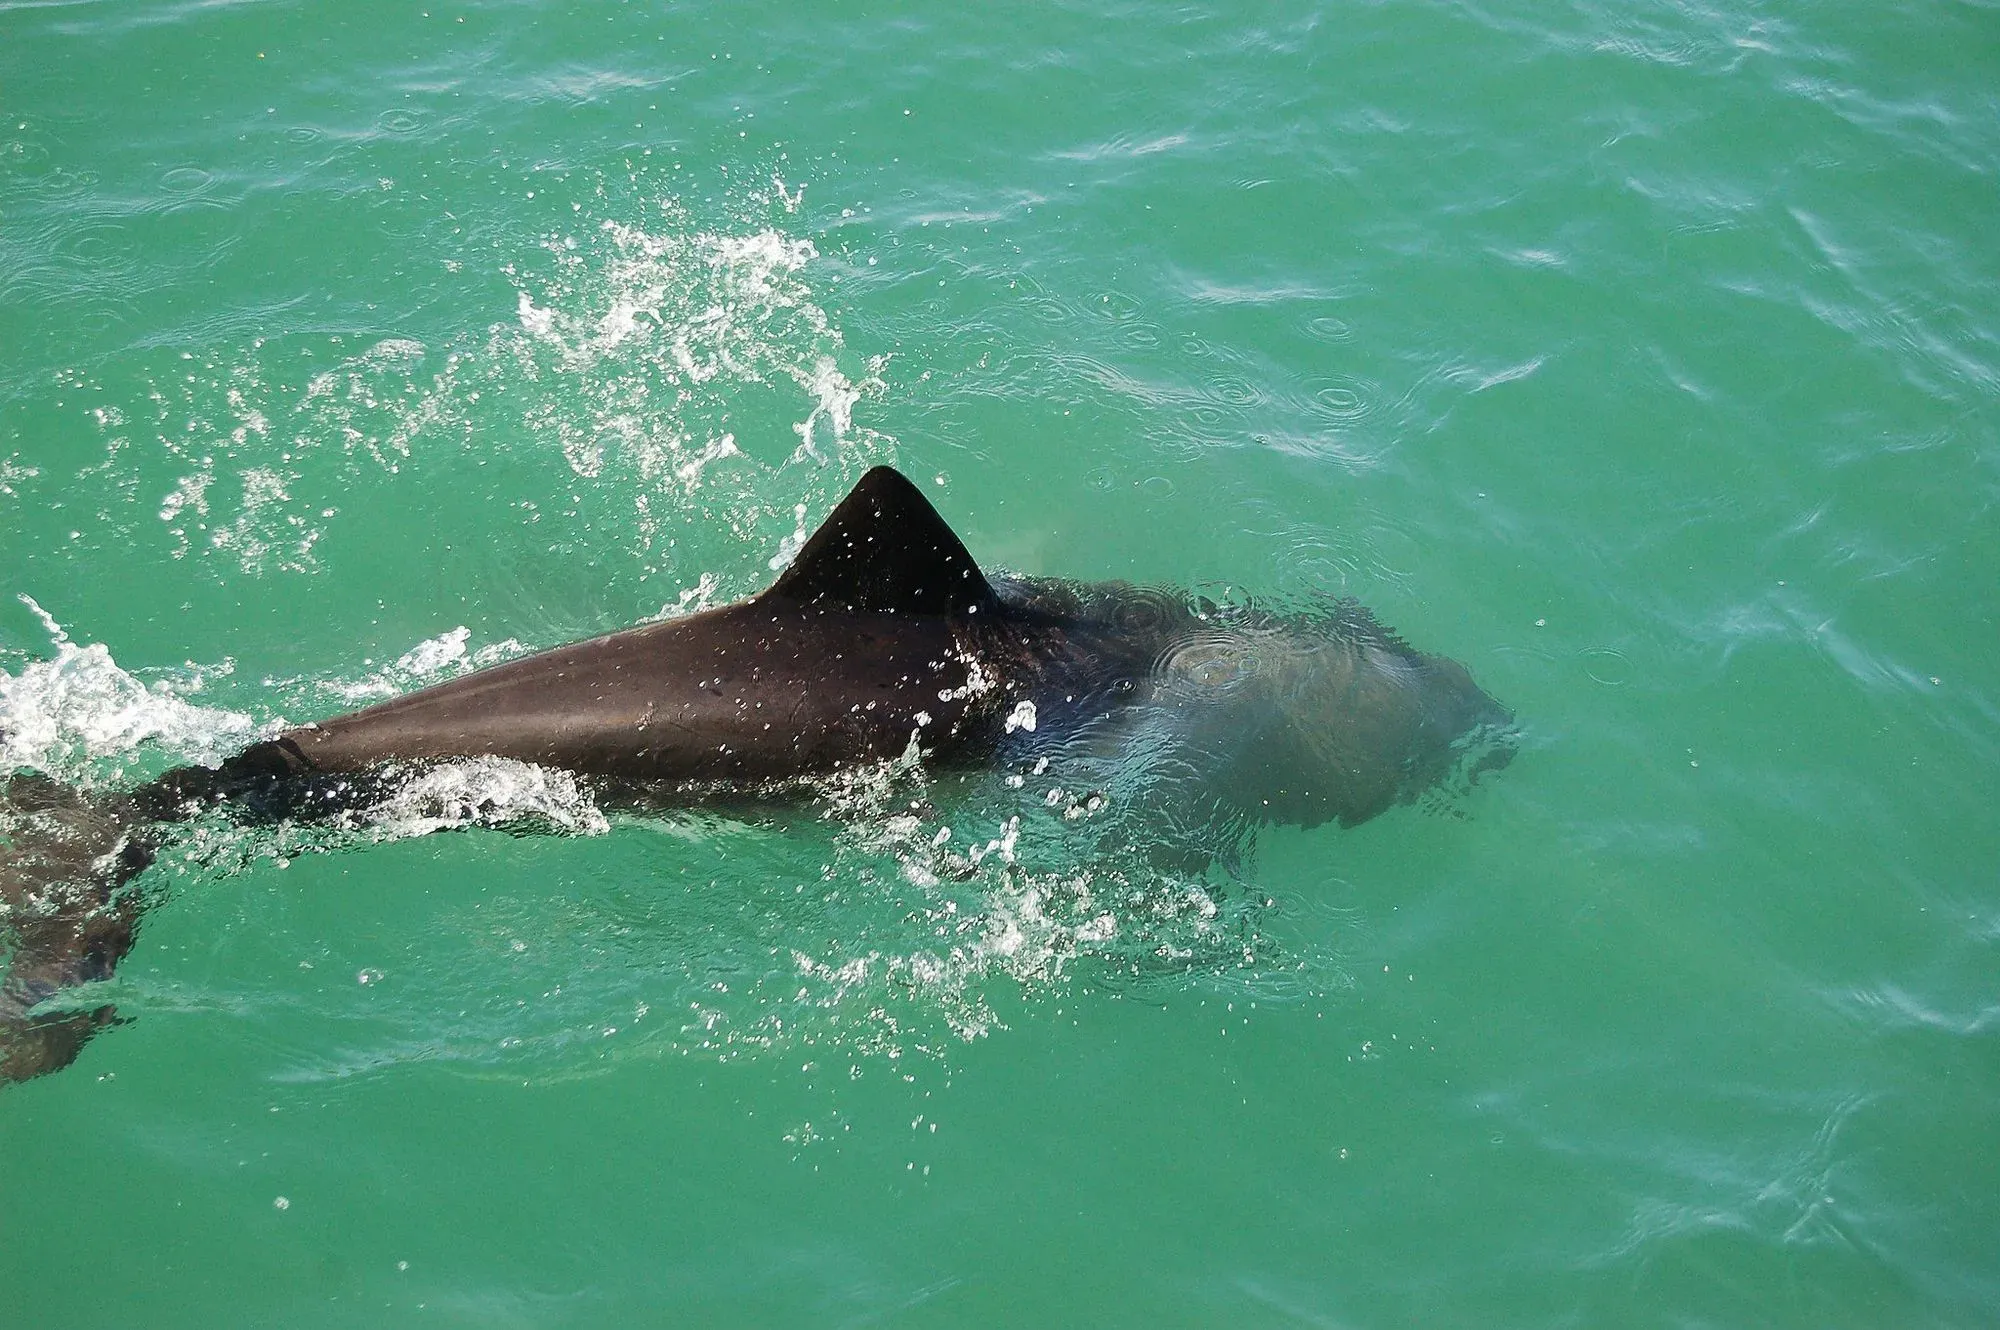 Benguela dolphins are a protected species.